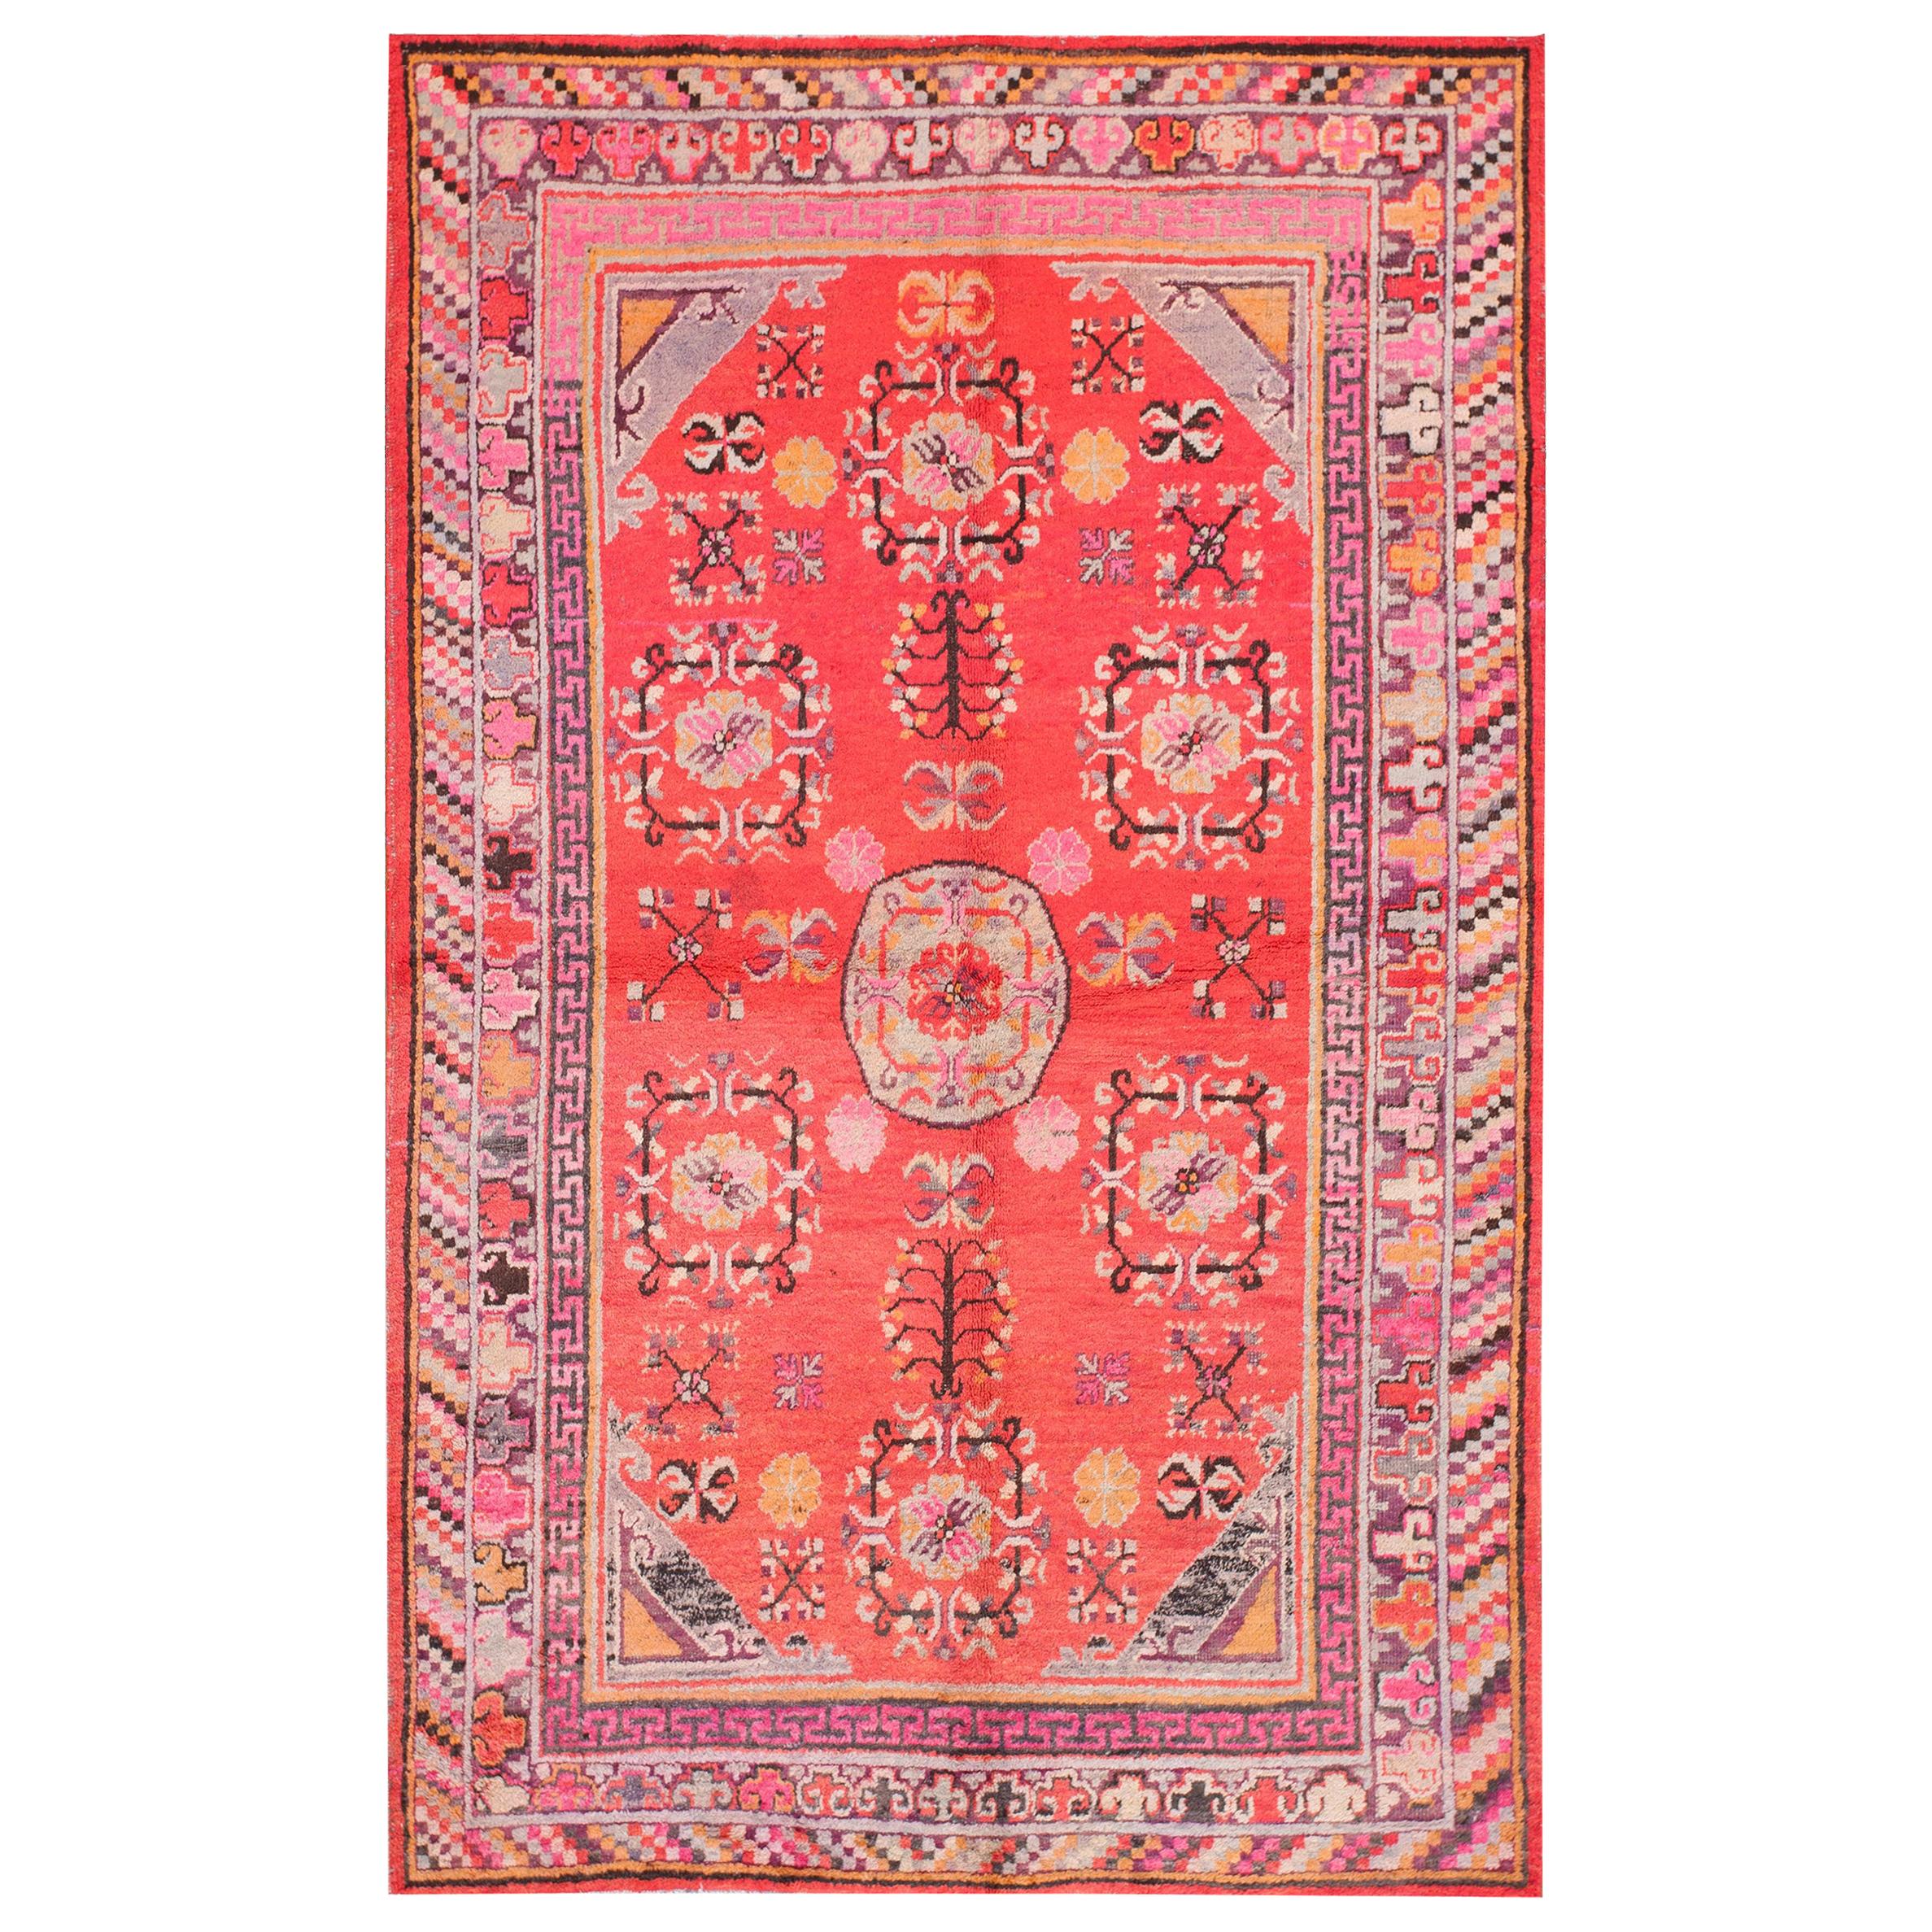 Early 20th Century Central Asian Khotan Carpet ( 5'2" x 8'3" - 157 x 252 ) For Sale